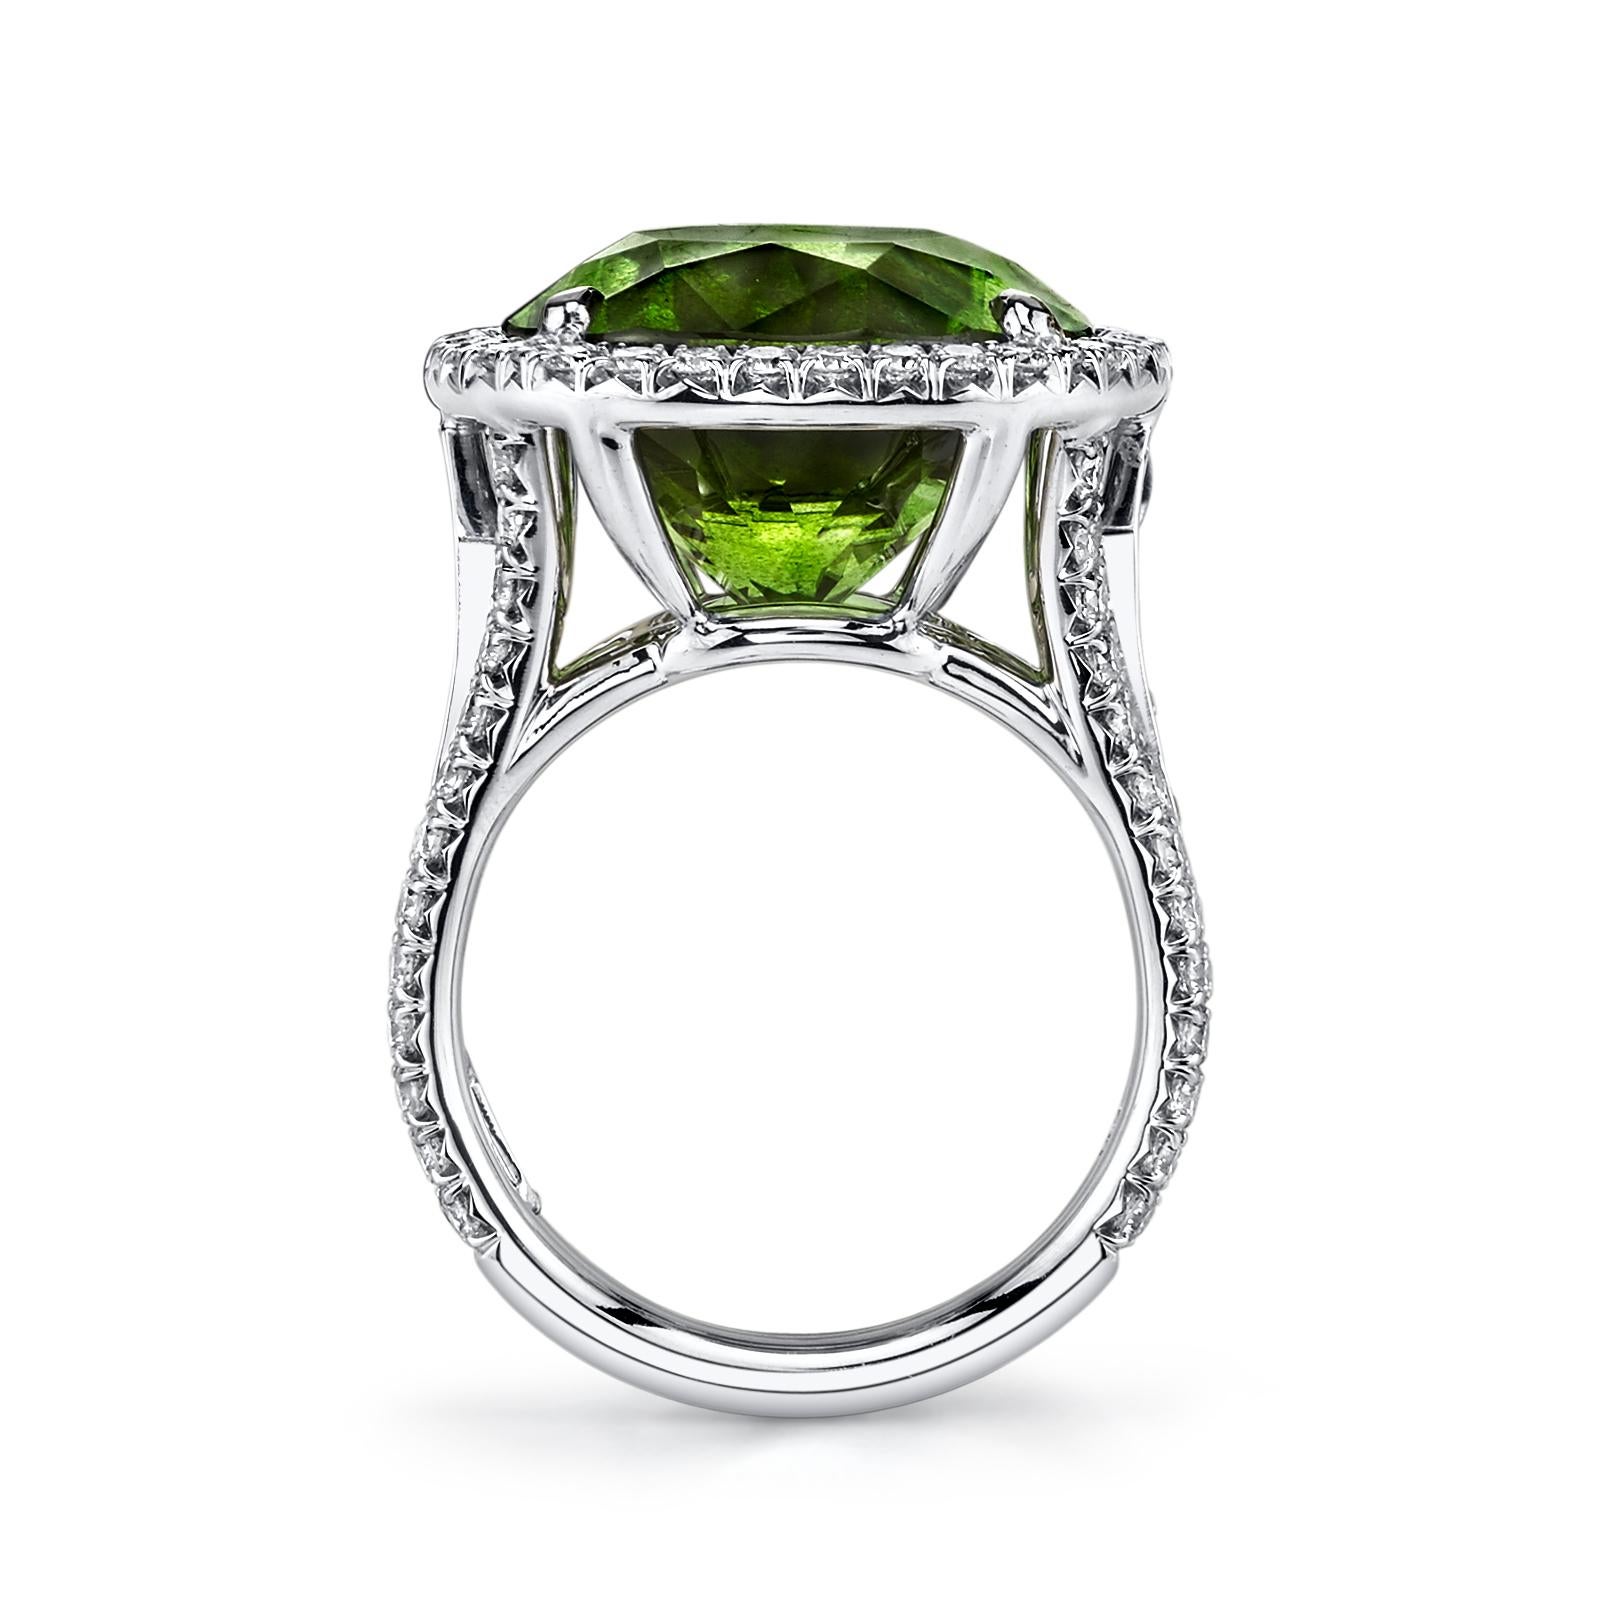 Art Deco 16.16ct Burmese Peridot Ring Adorned with 1.15ct Diamonds and Set in 18 KW